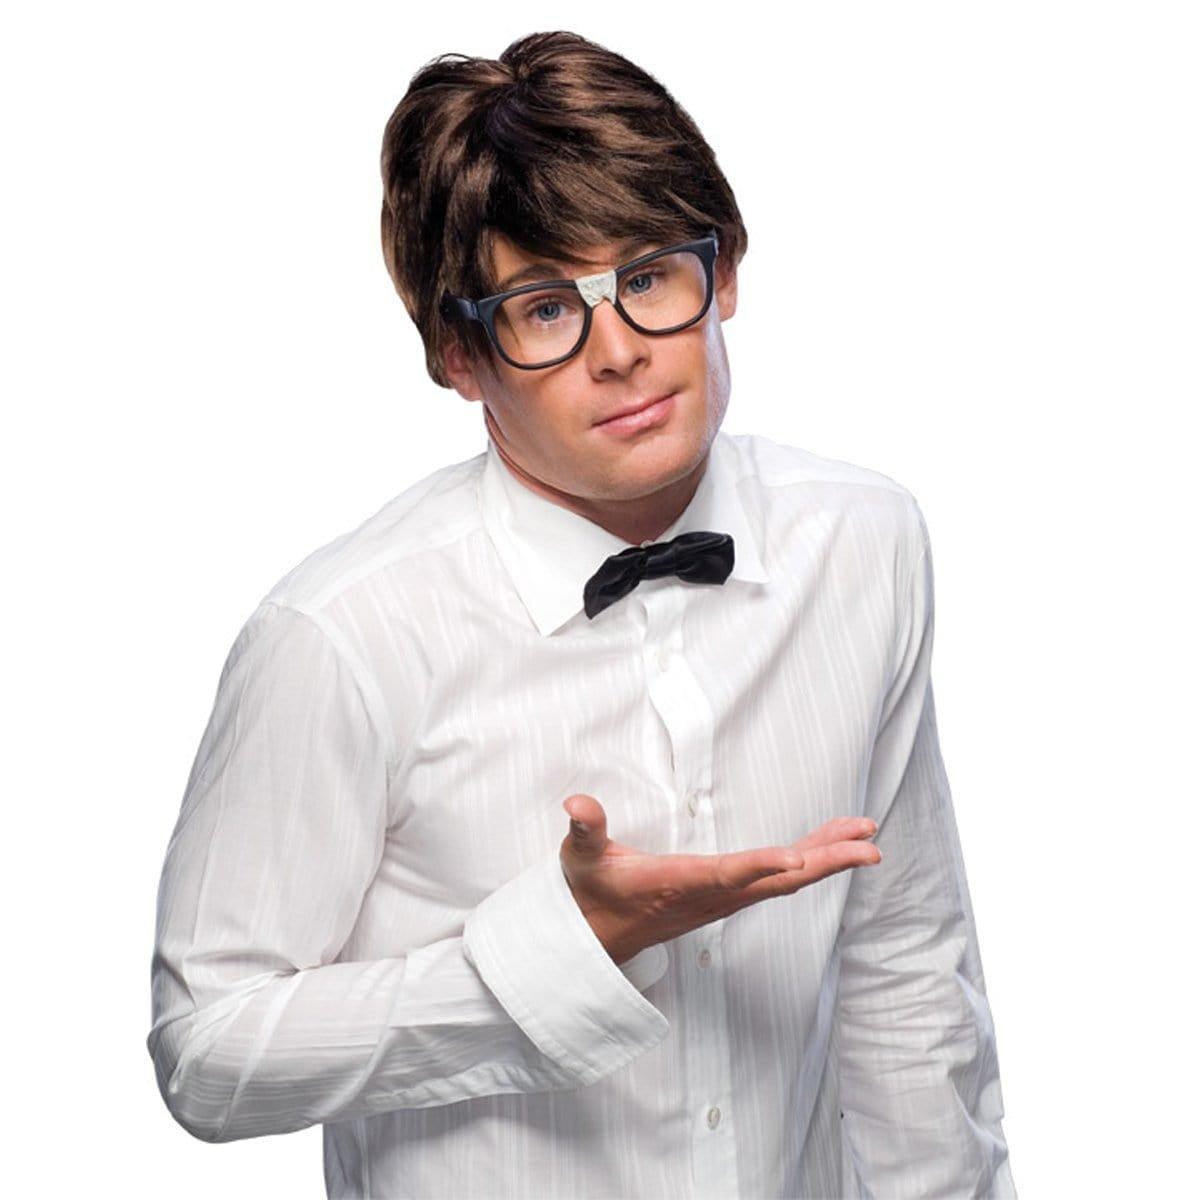 Buy Costume Accessories Brown nerd character wig for men sold at Party Expert